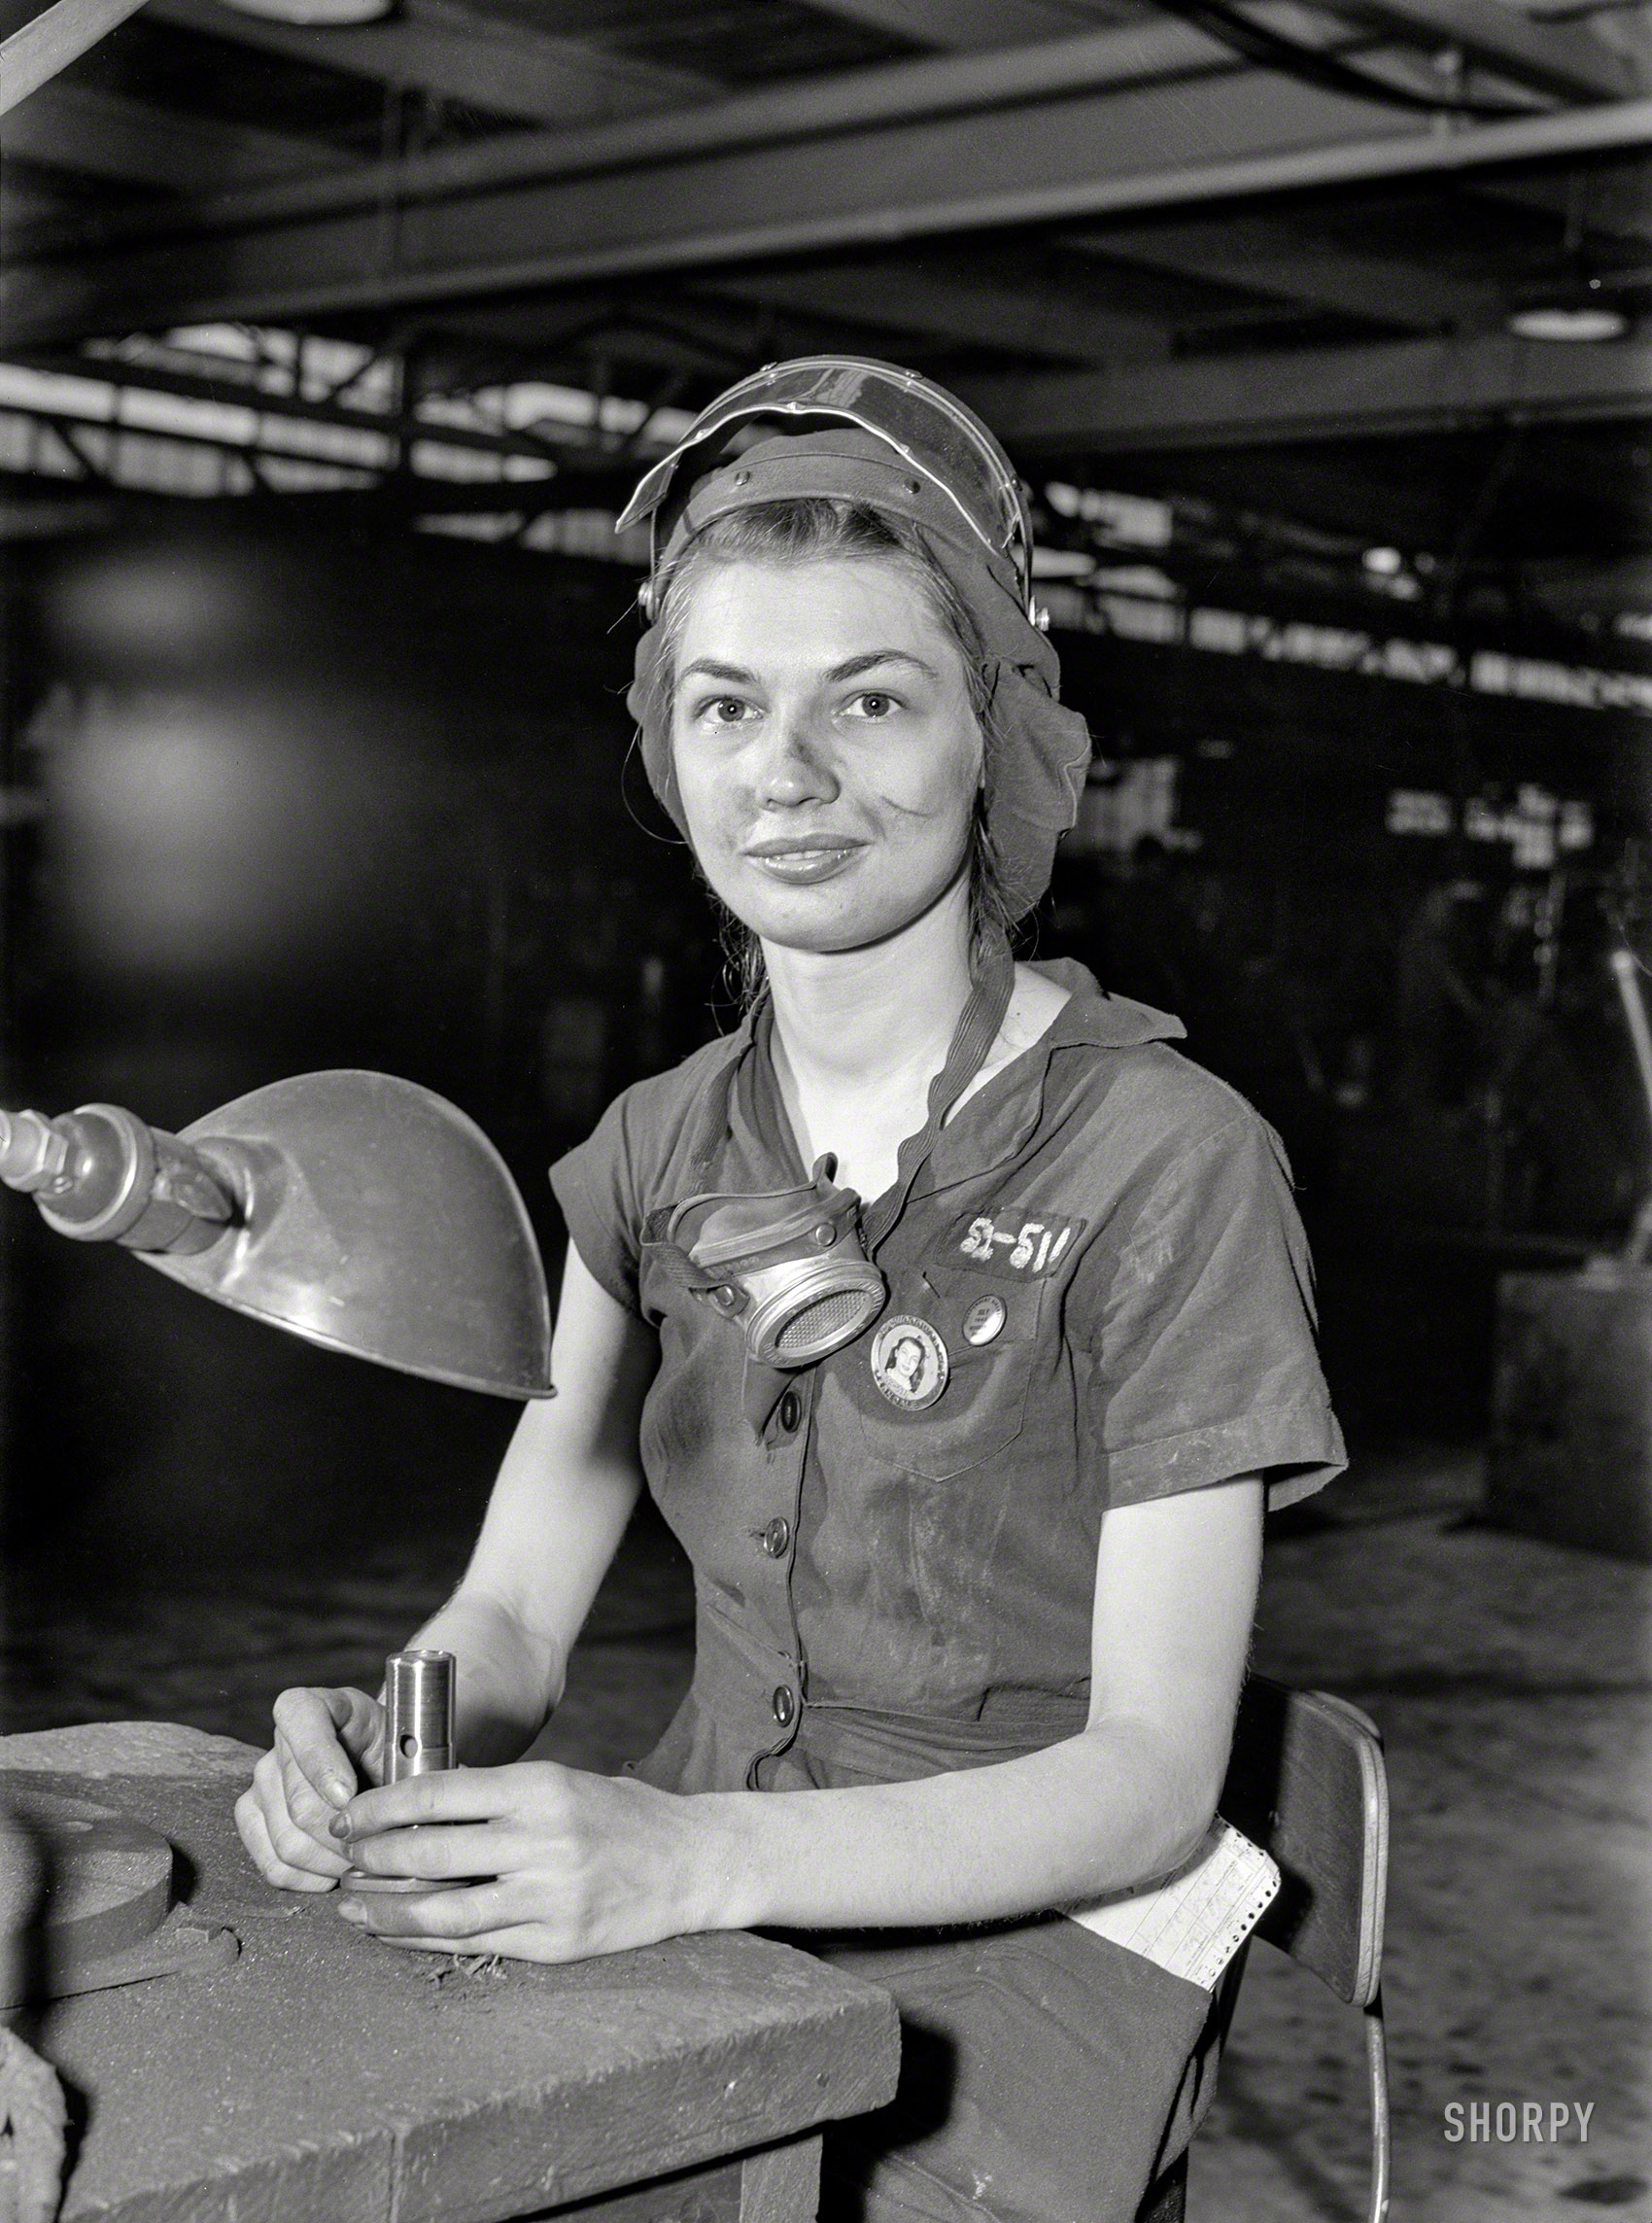 August 1942. "Women in industry. A million-dollar baby, not in terms of money but in her value to Uncle Sam, 21-year-old Eunice Hancock, erstwhile five-and-ten-cent store employee, operates a compressed-air grinder in a Midwest aircraft plant. With no previous experience, Eunice (last seen here) quickly mastered the techniques of her war job and today is turning out motor parts with speed and skill." Photo by Ann Rosener, Office of War Information. View full size.